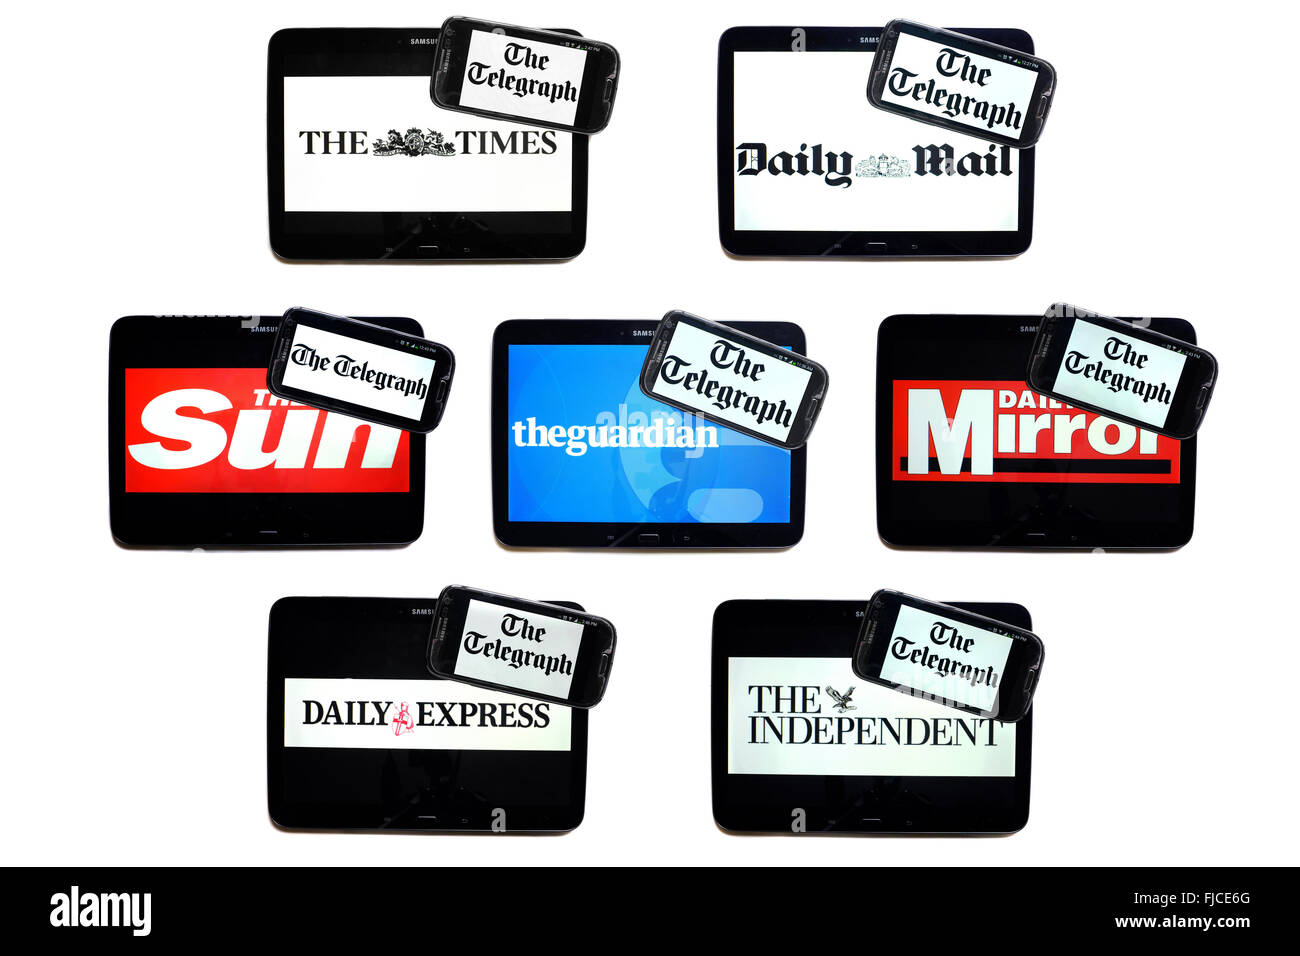 The Telegraph newspaper logo on smartphone screens surrounded by tablets displaying the logos of rival newspapers. Stock Photo